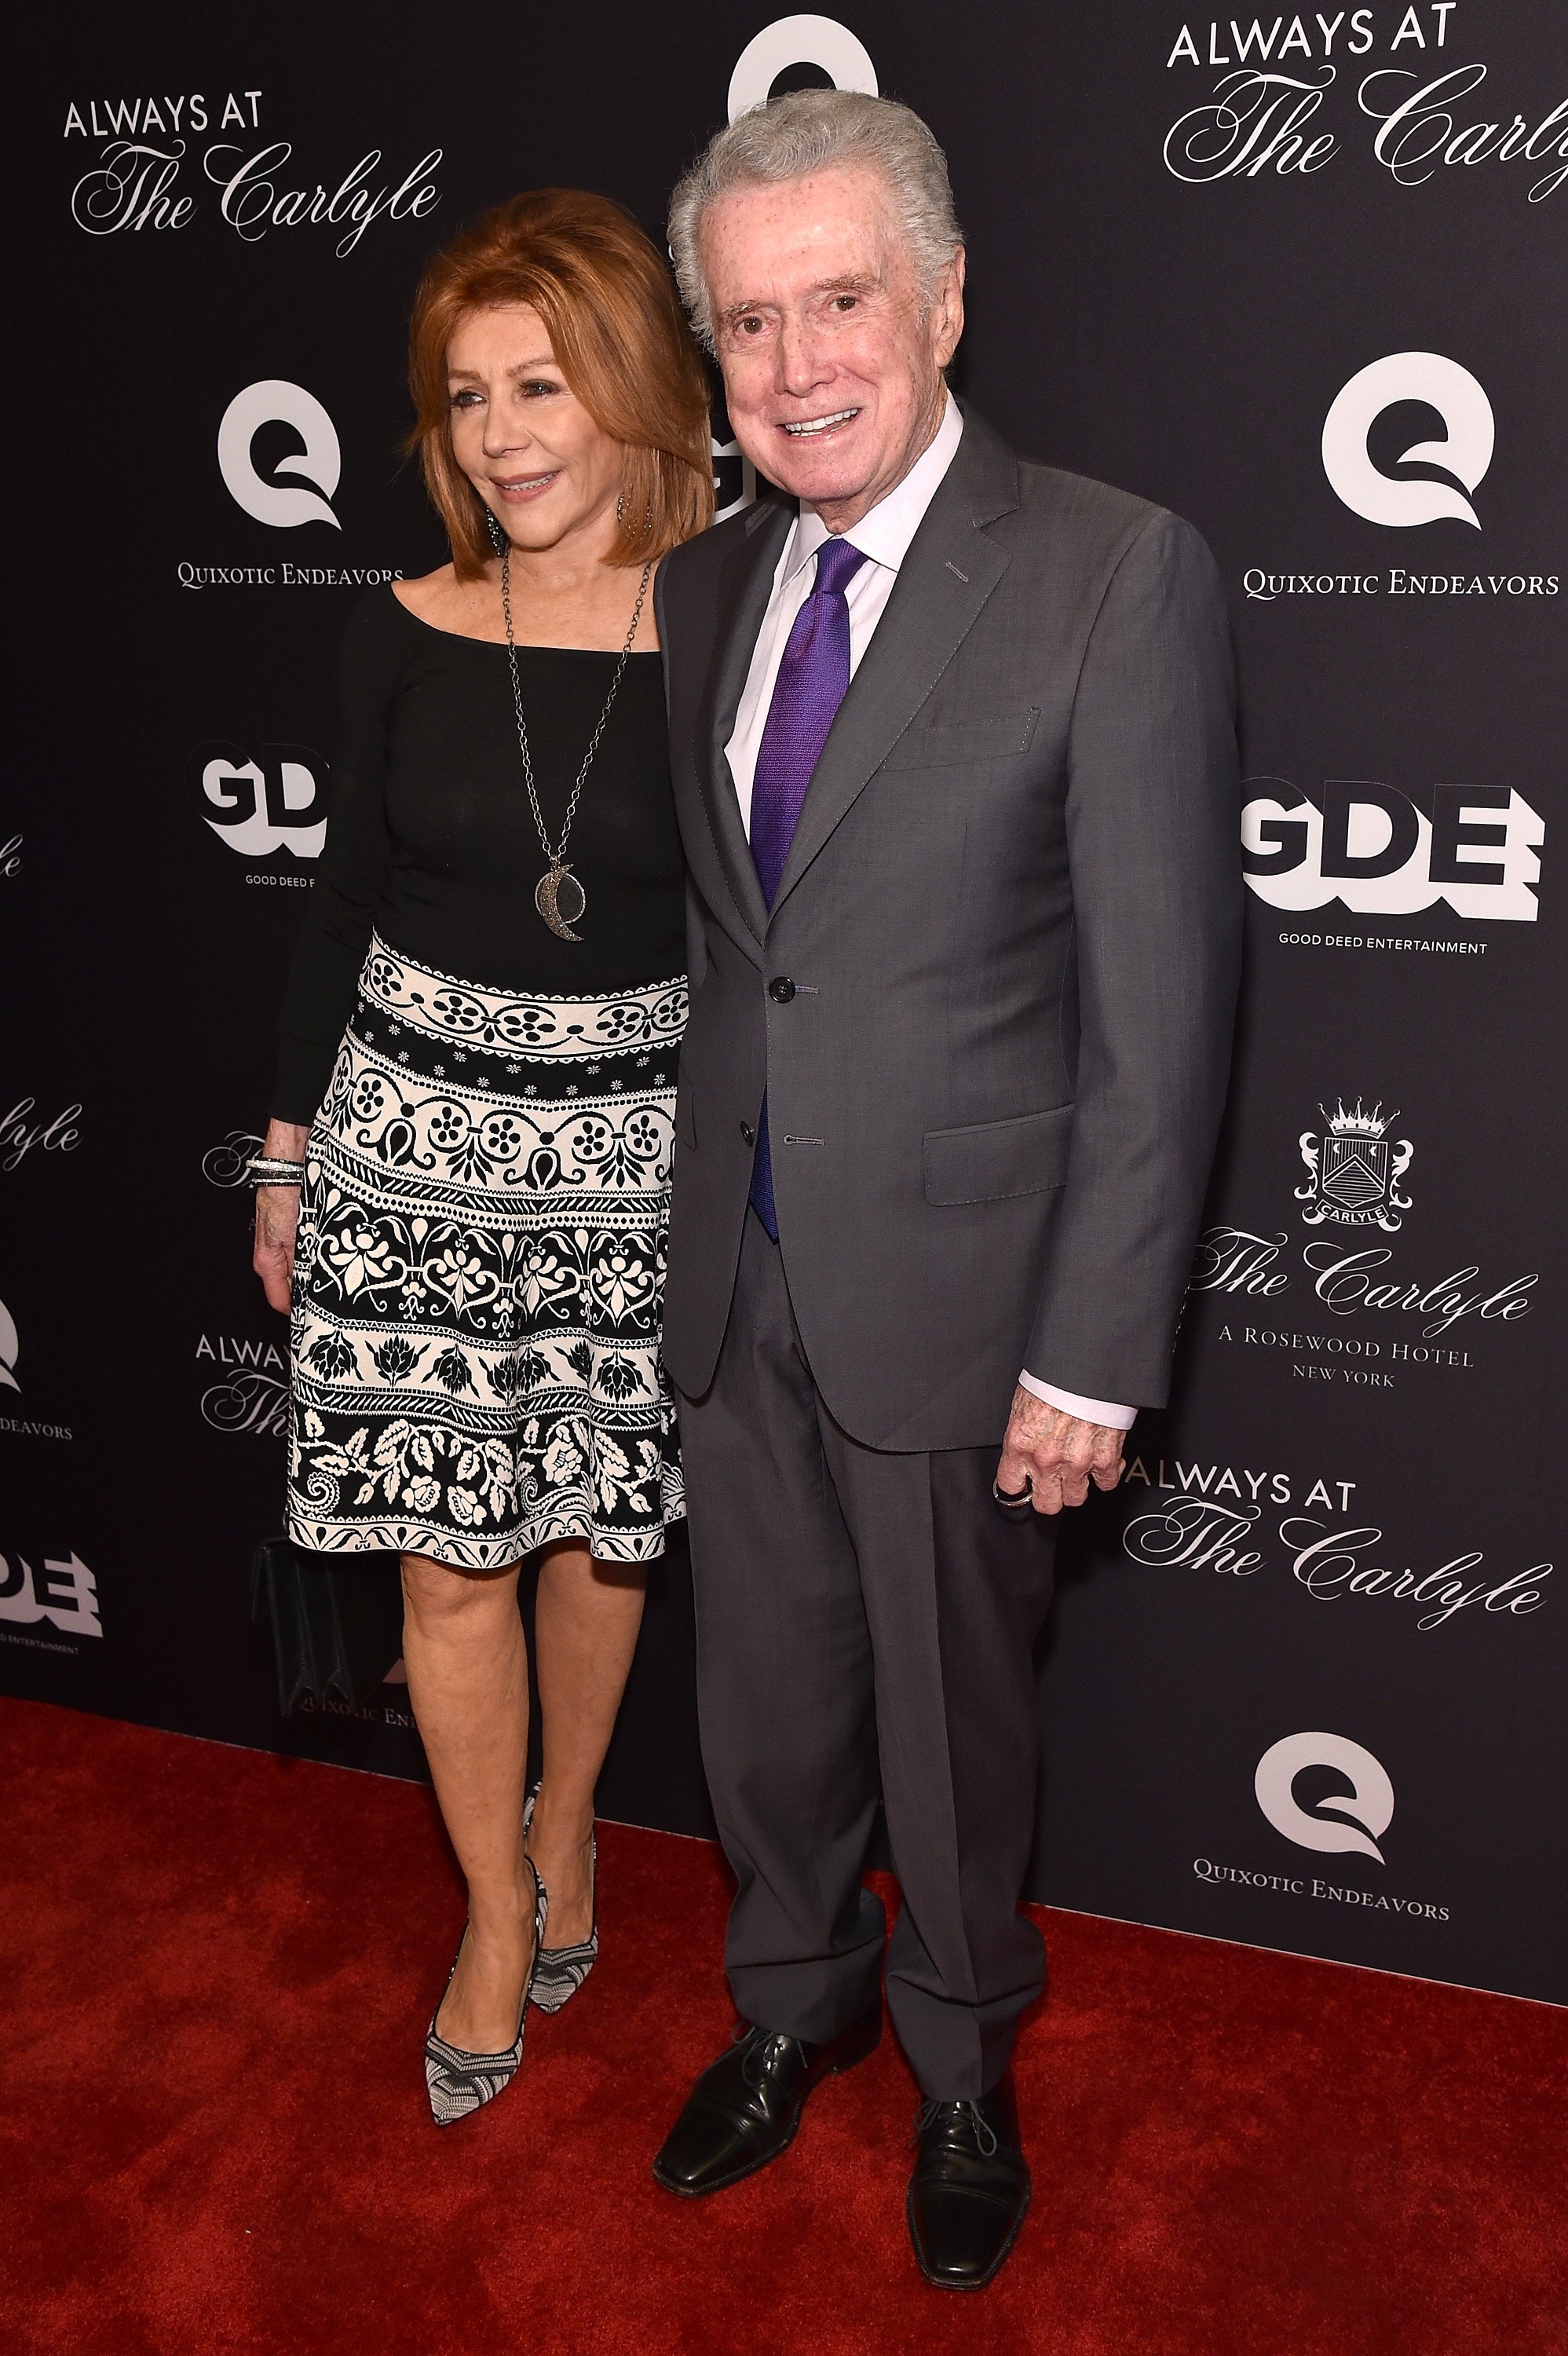 Joy Philbin and Regis Philbin at the "Always At The Carlyle" Premiere, 2018, New York City. | Photo: Getty Images